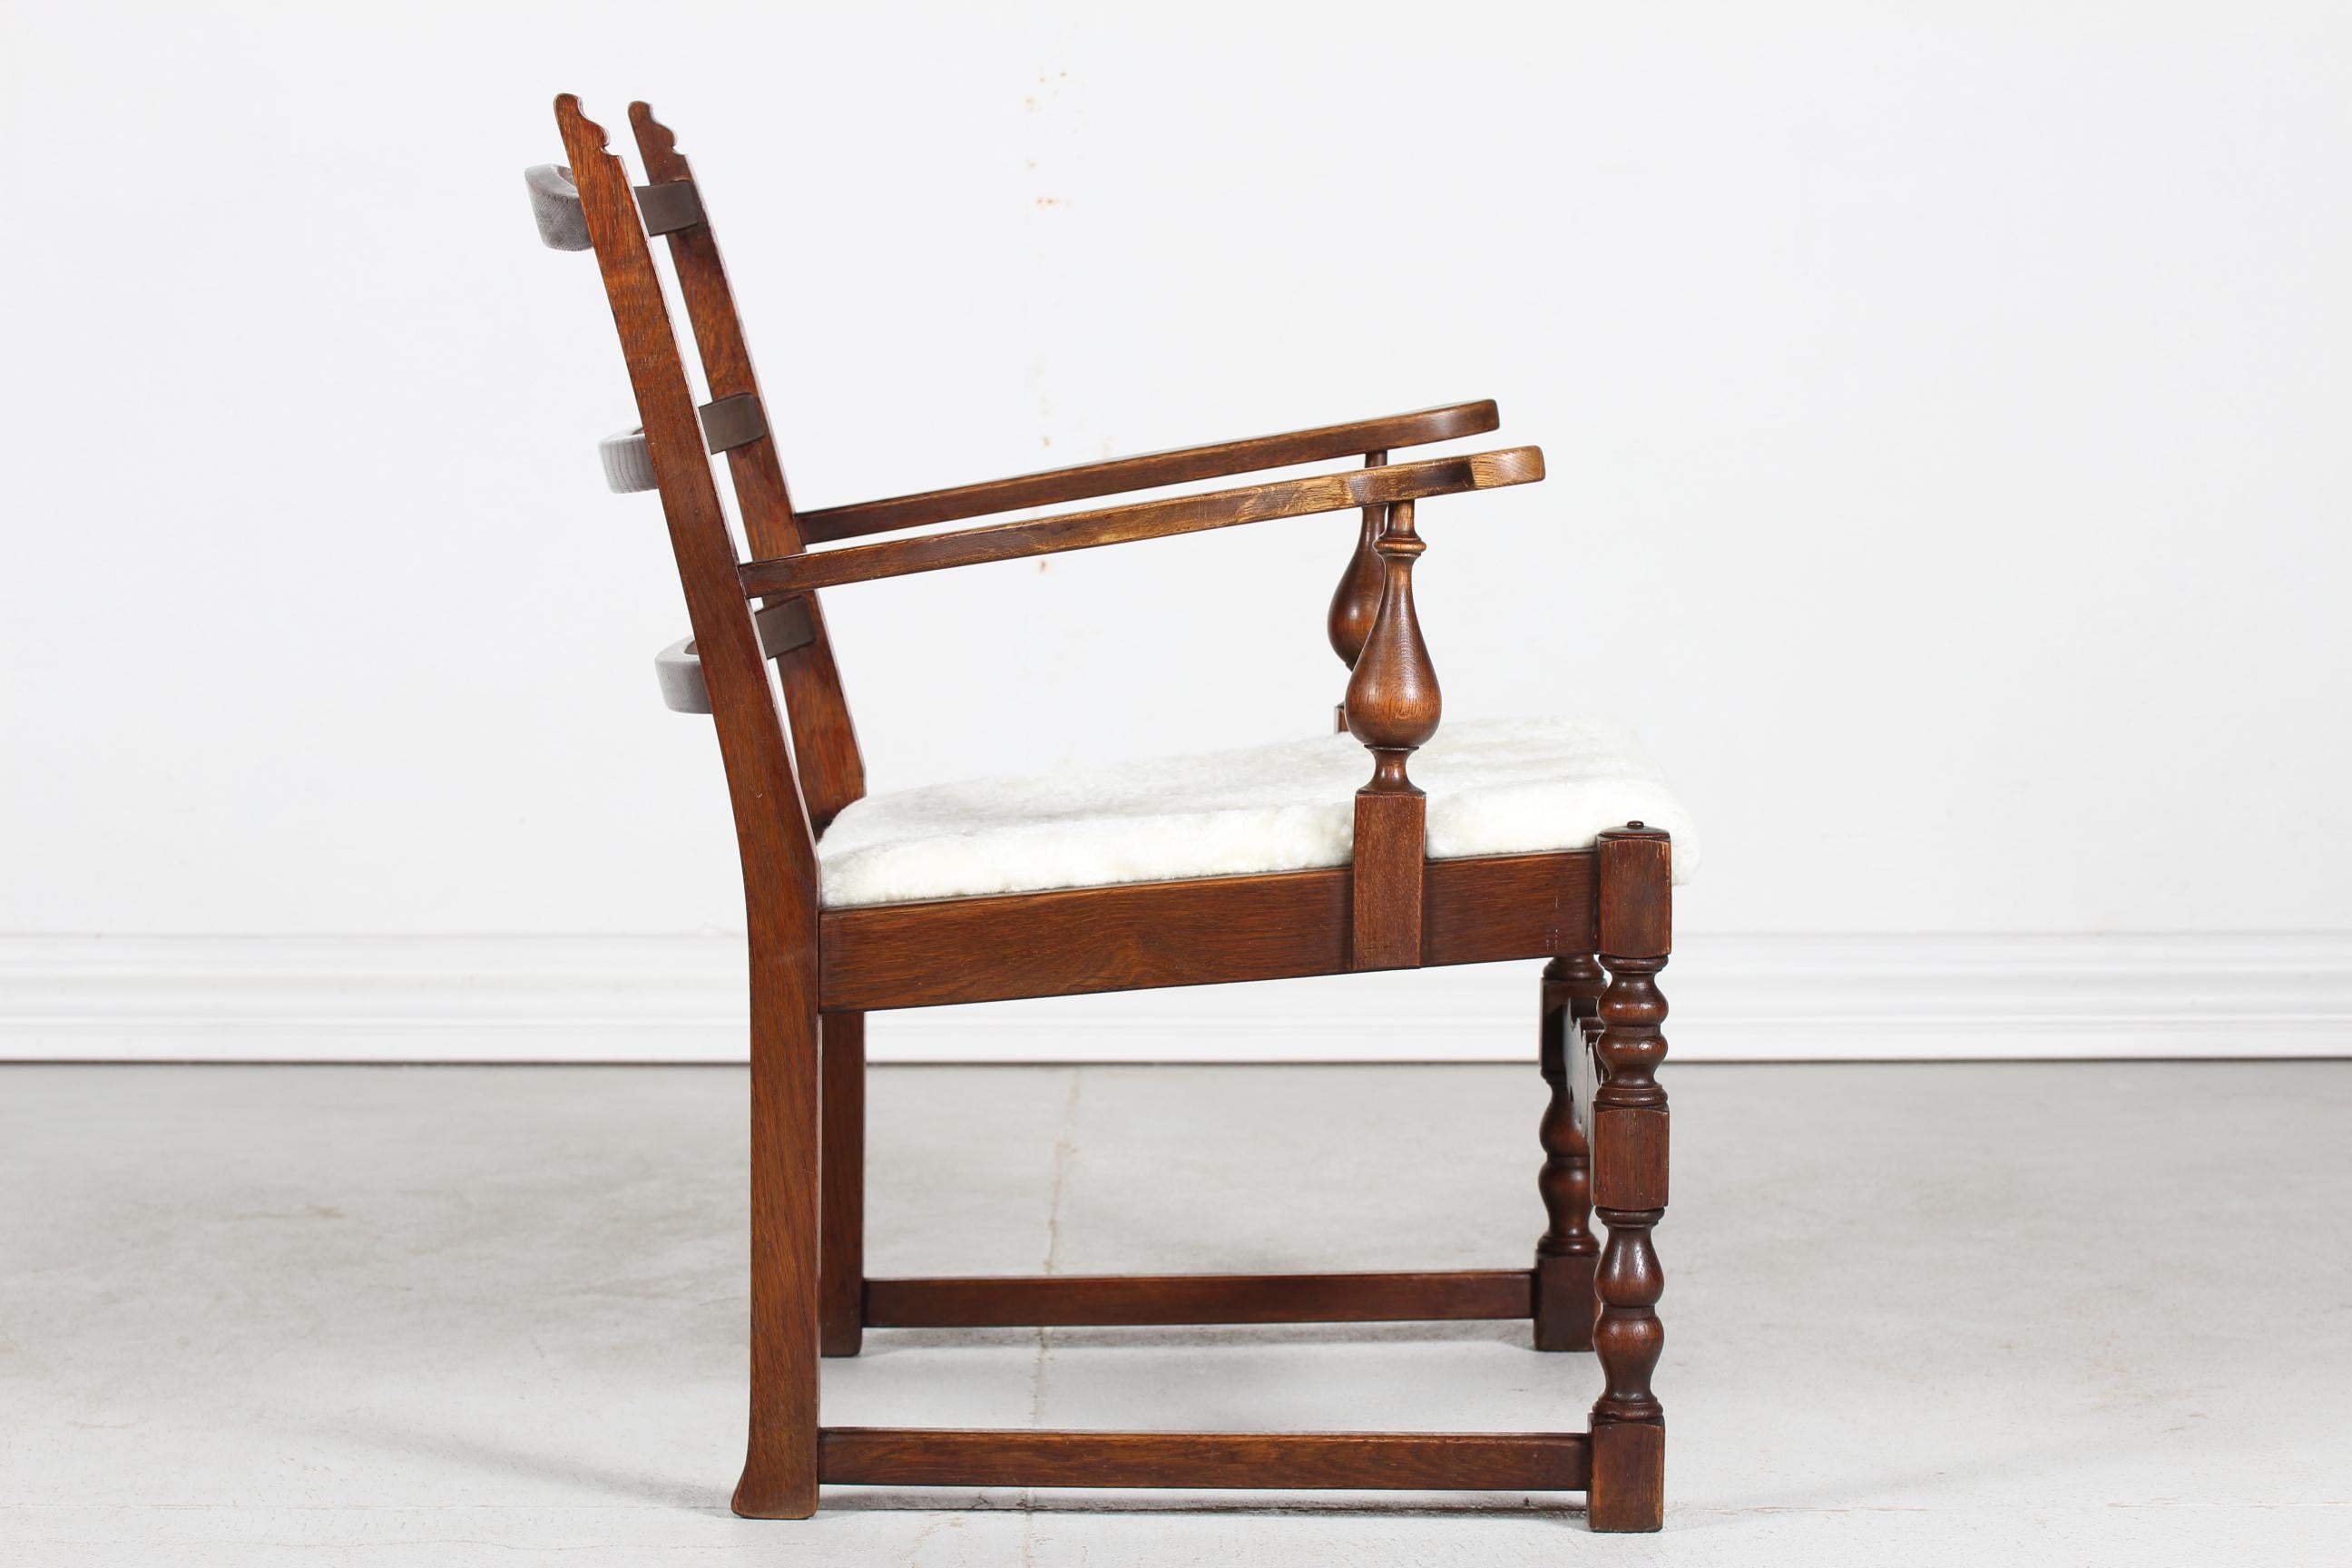 Carved Danish Sculptural Handcrafted Lounge Chair of Solid Oak with Sheepskin 1940s For Sale